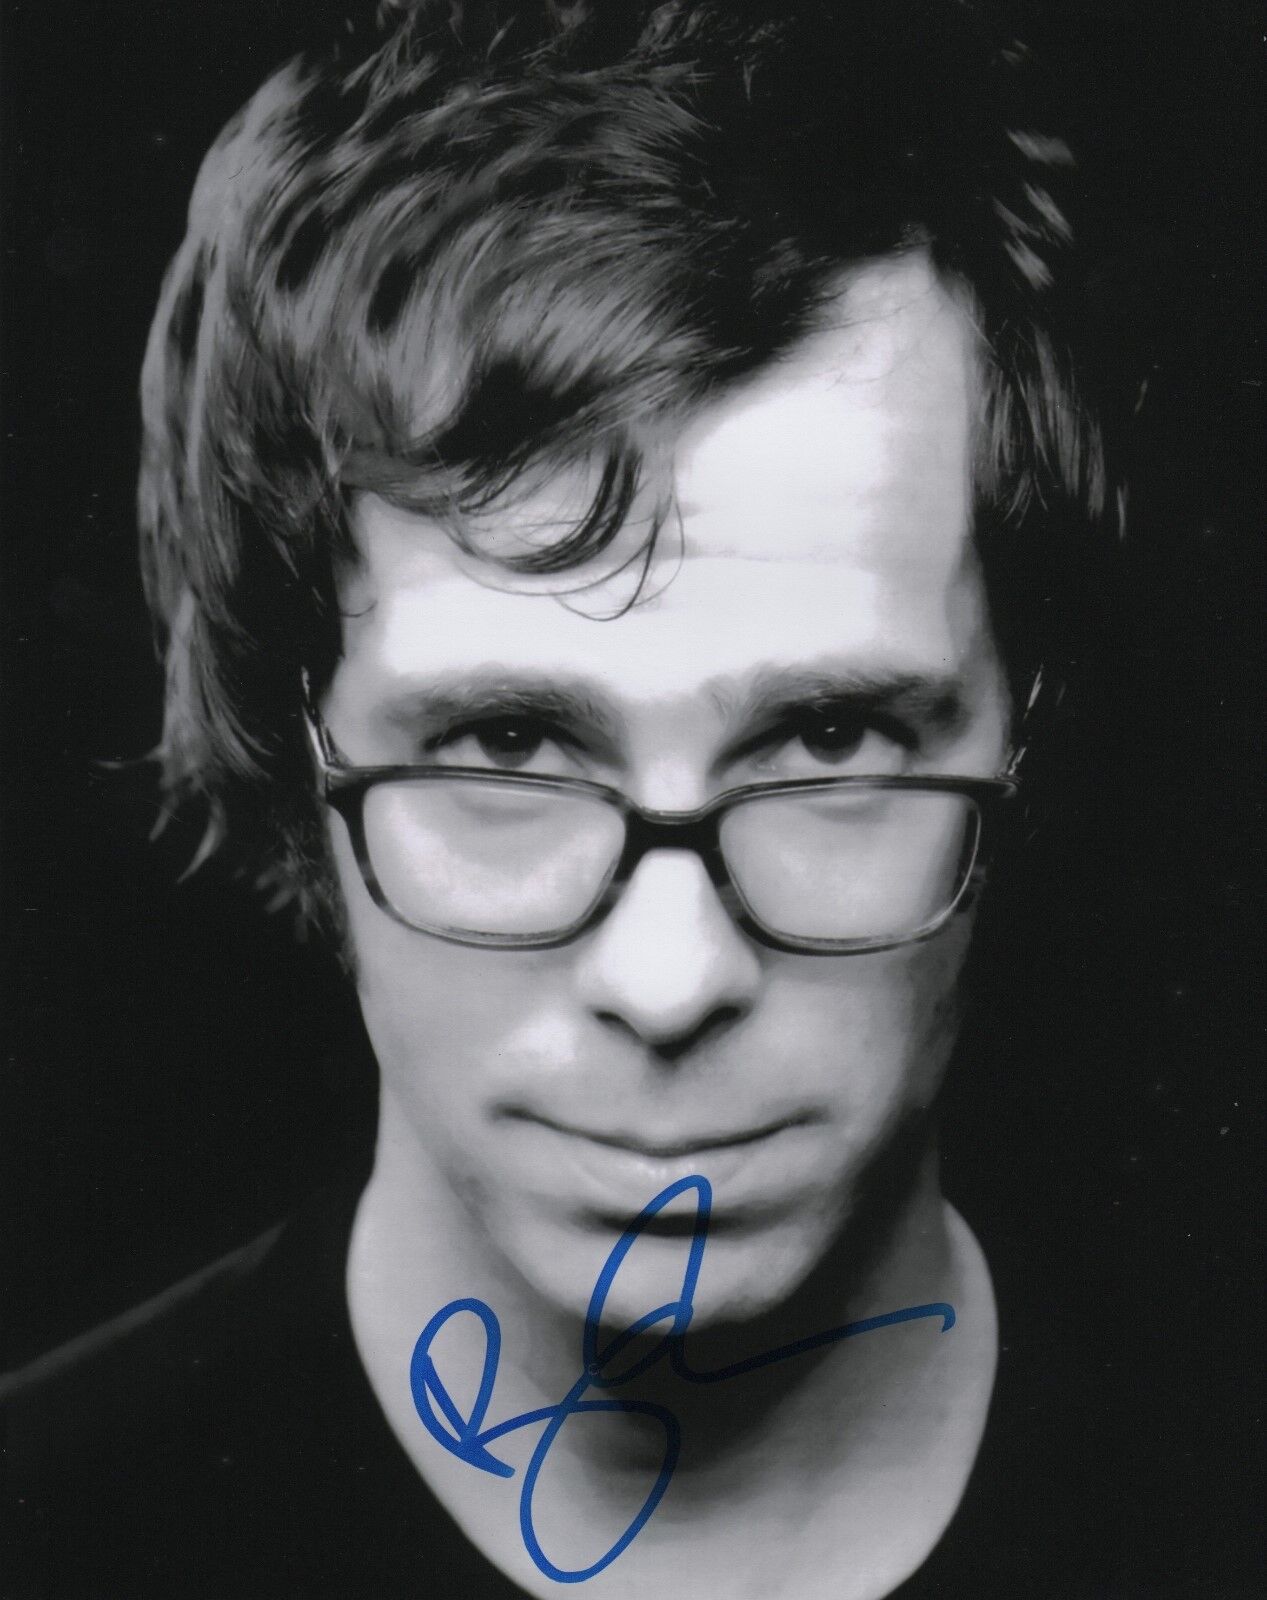 Ben Folds REAL hand SIGNED 8x10 Photo Poster painting #2 COA Autographed pianist